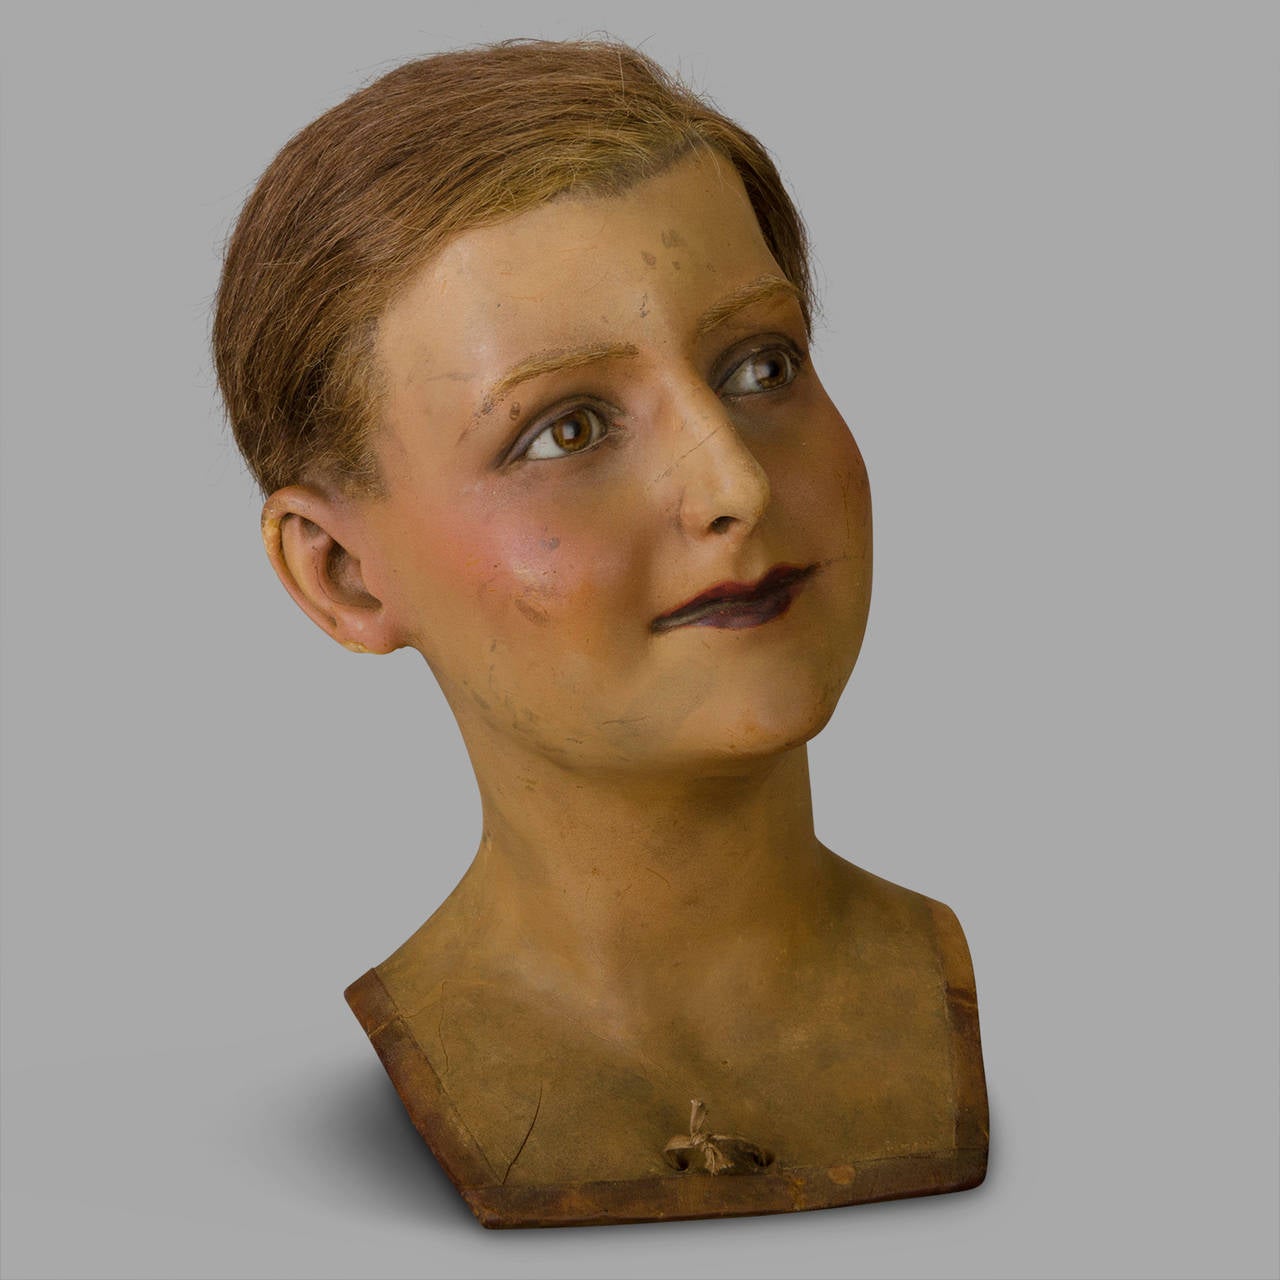 Store mannequin head with glass eyes and natural hair. In good condition it has some small accidents and few traces that enrich its patina.